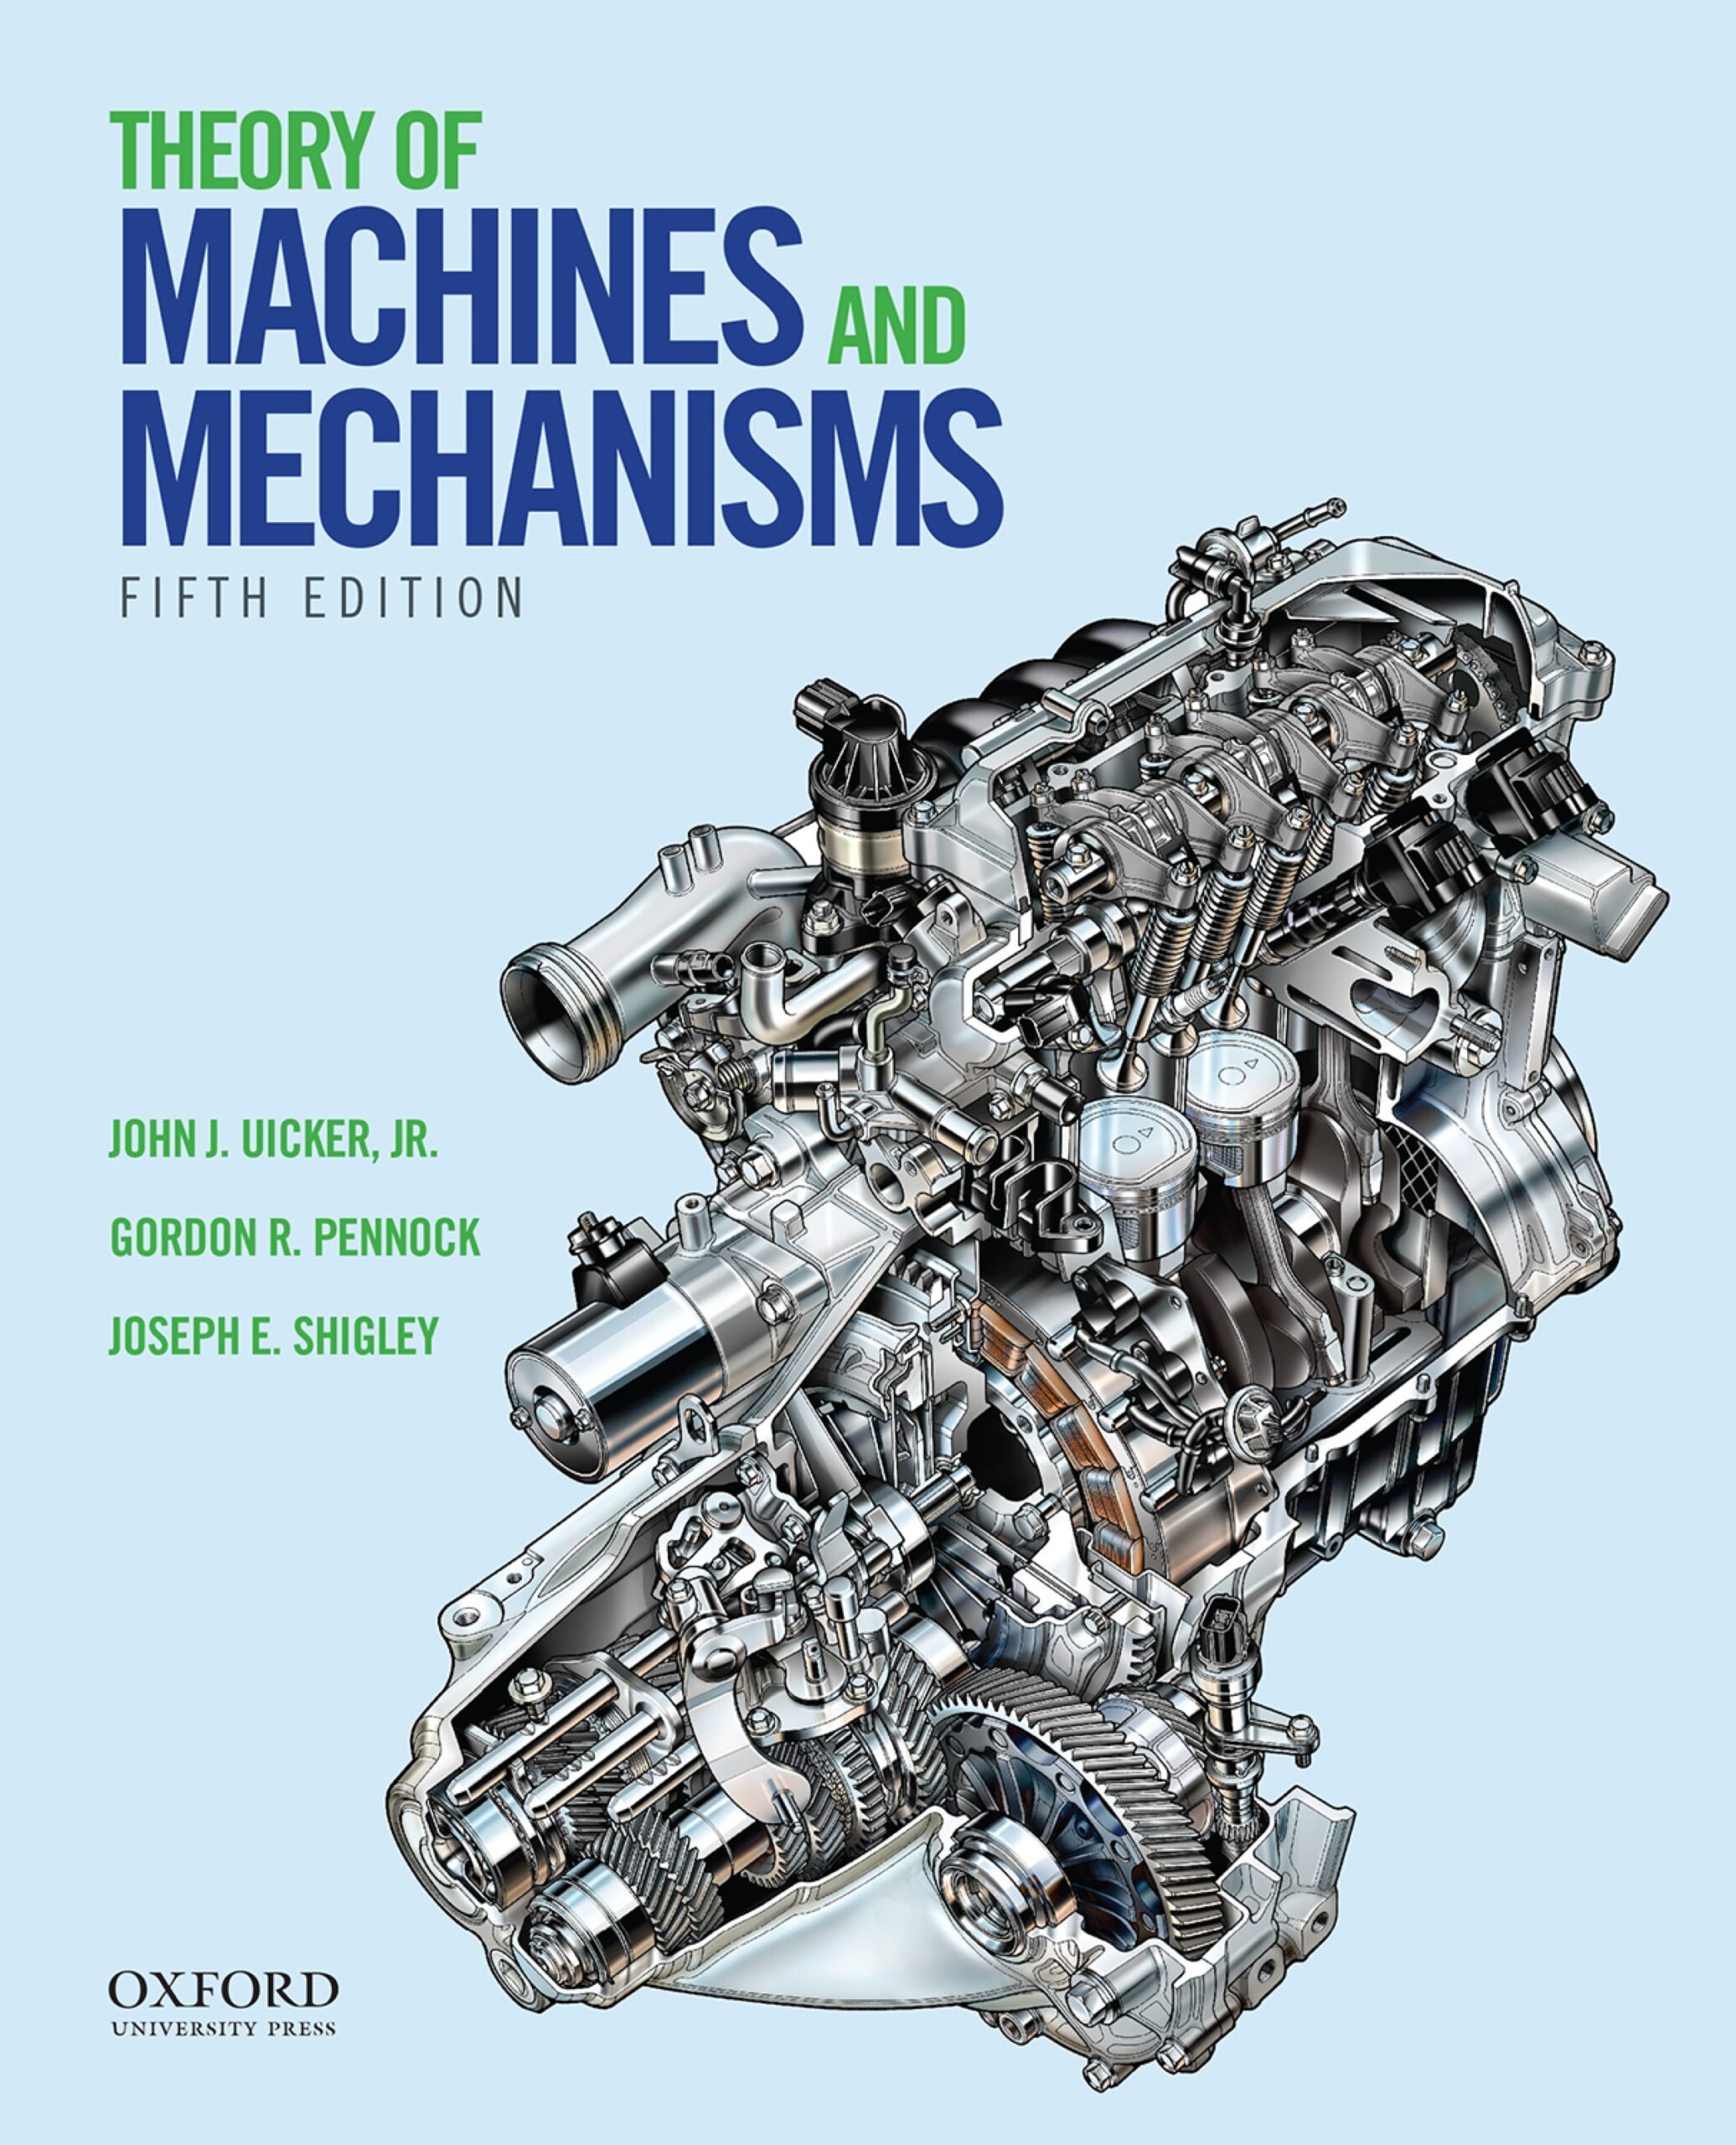 Theory of Machines and Mechanisms (5th Edition) – eBook PDF